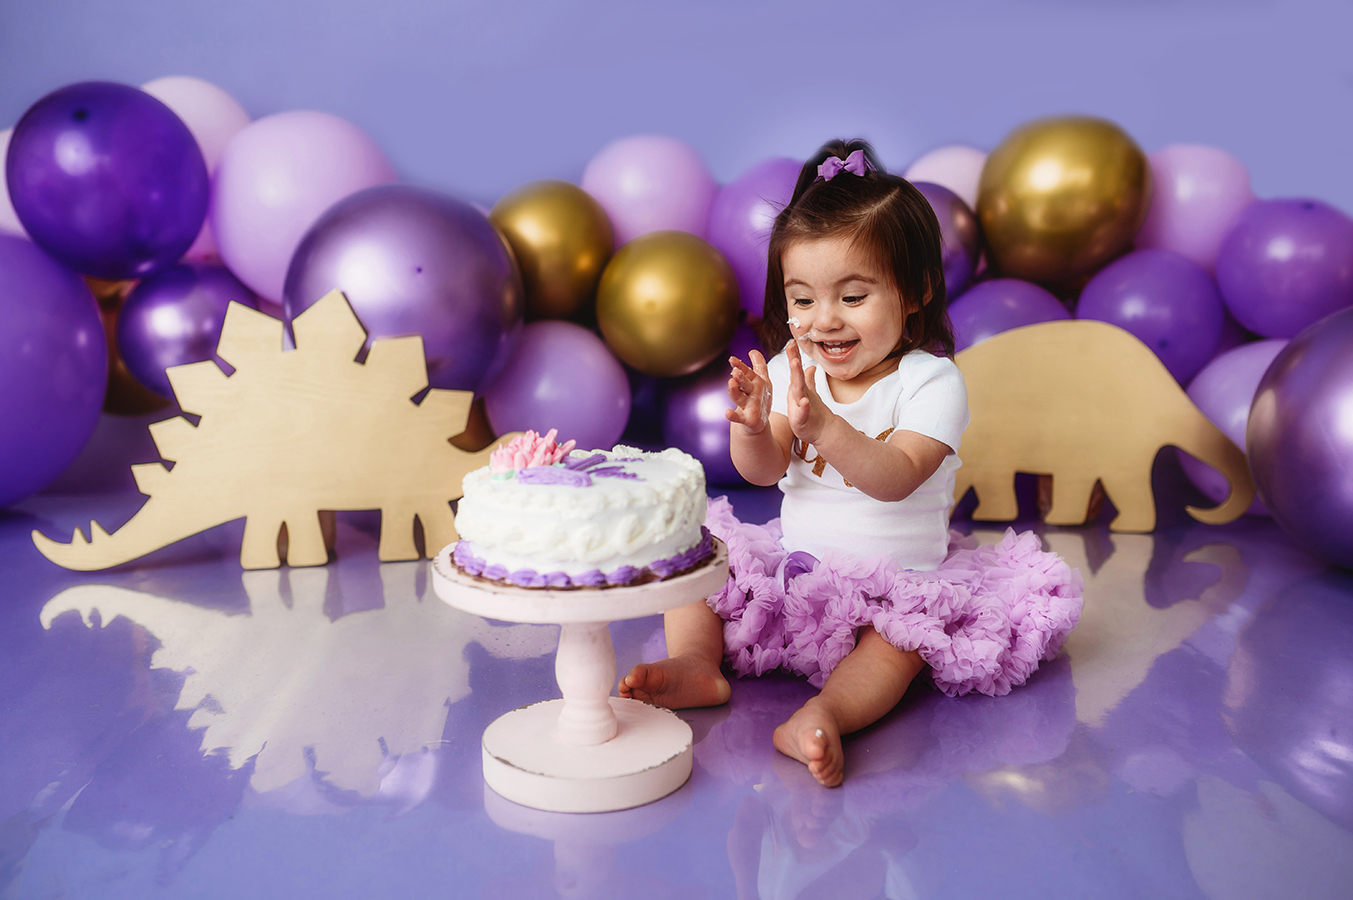 One year old baby girl celebrates her first birthday with a cake smash portrait session at an Asheville, NC Portrait Studio.